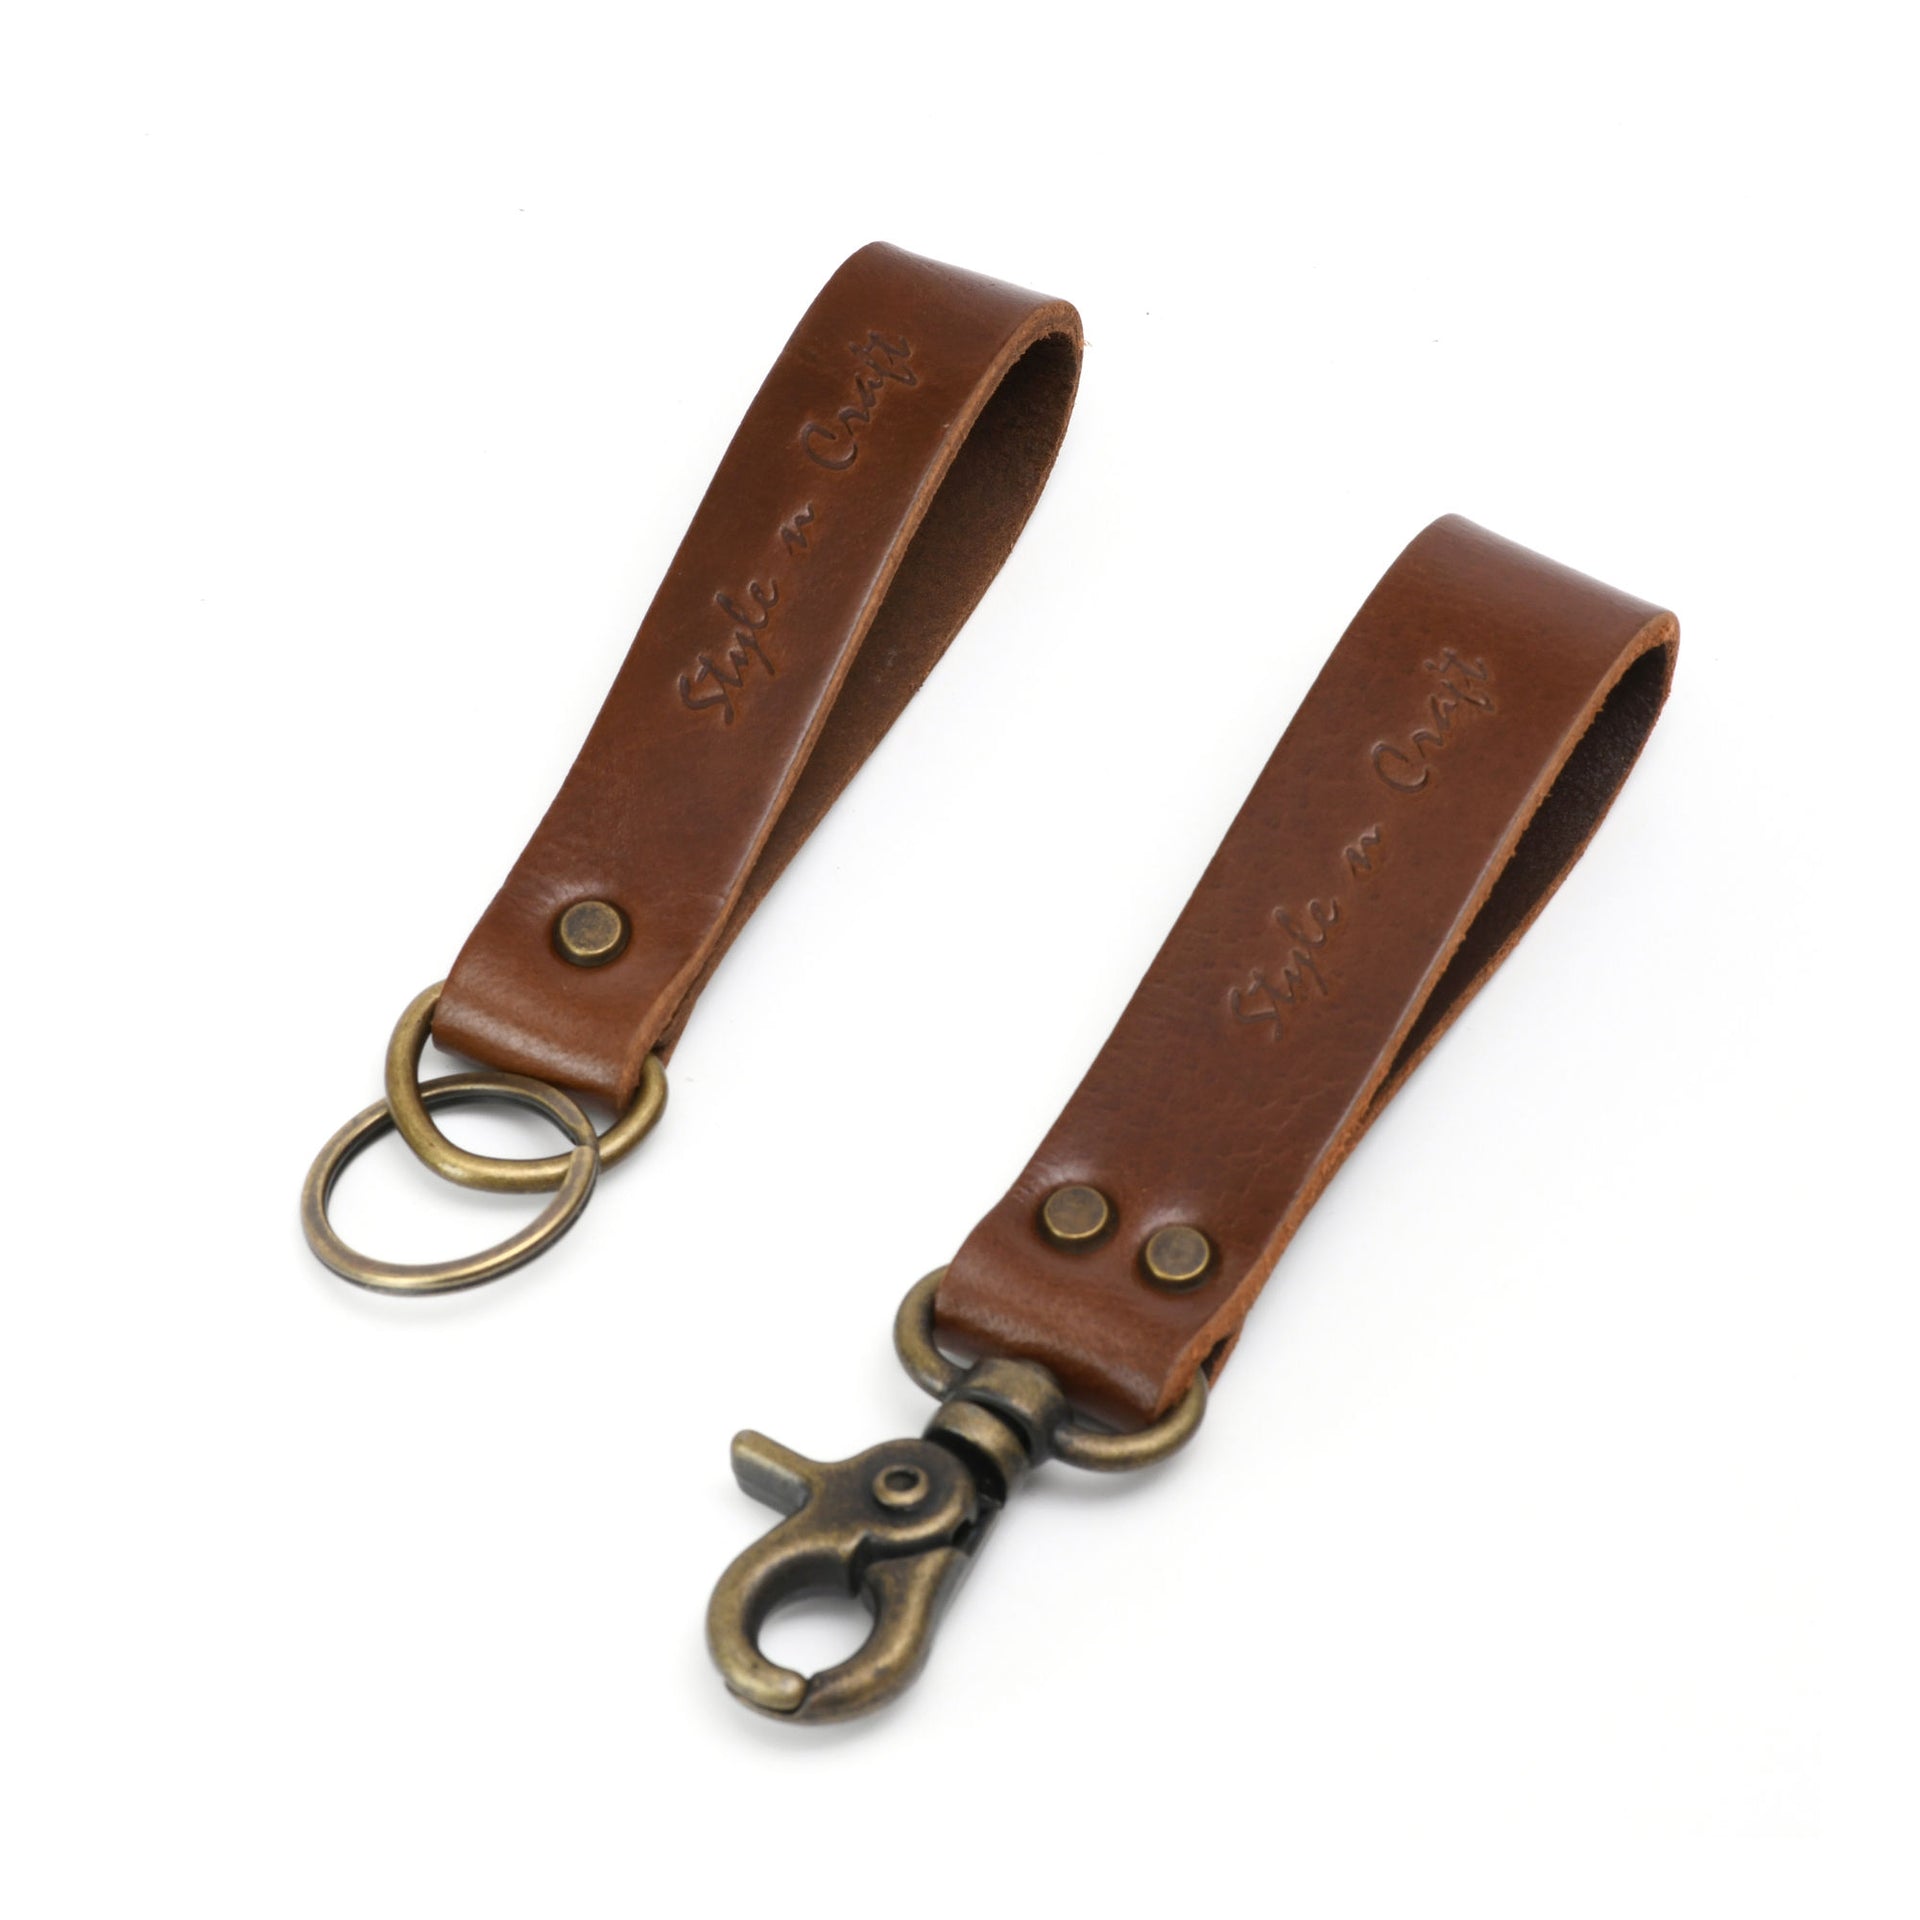 Snap Loop & Key Ring Combination in Heavy Top Grain Leather, Style n Craft